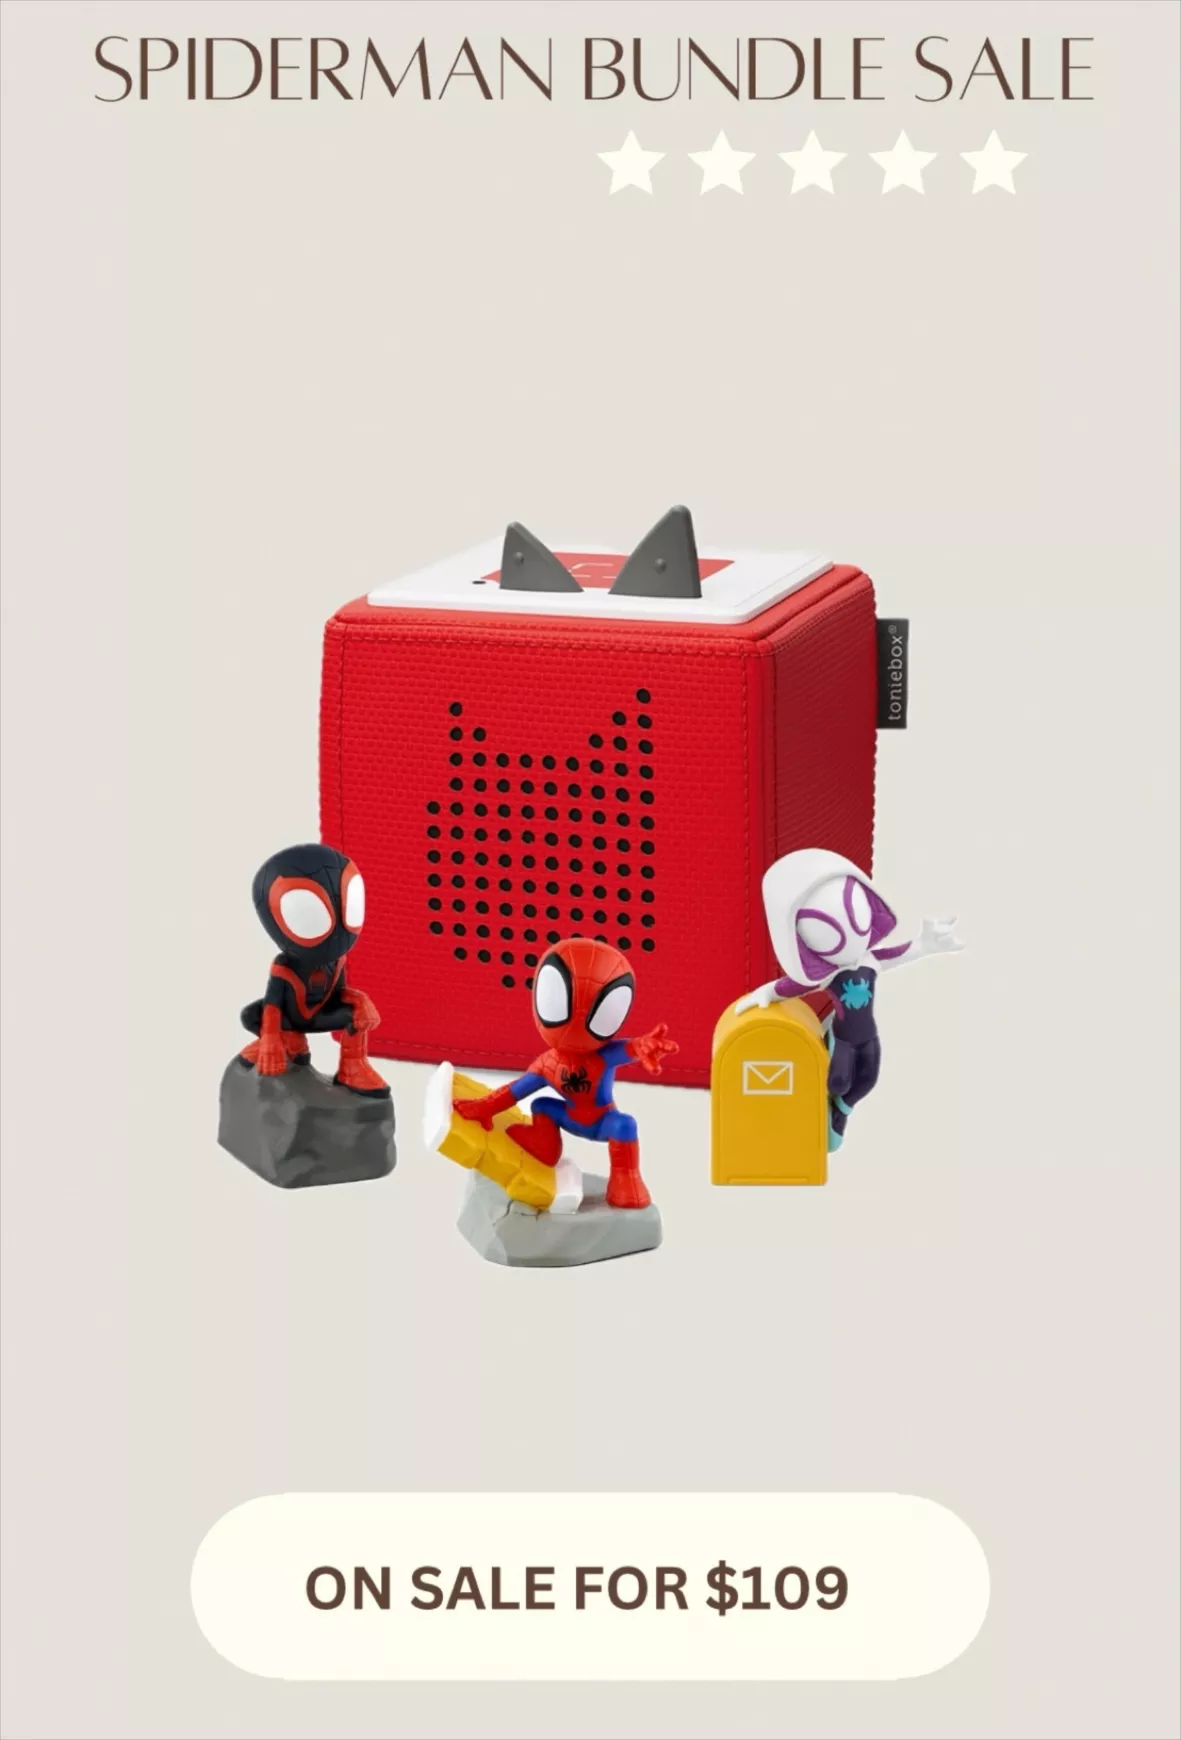 Tonies Marvel Toniebox Audio Player Bundle with Spidey and Friends, Red:  Weight: 3 lbs 